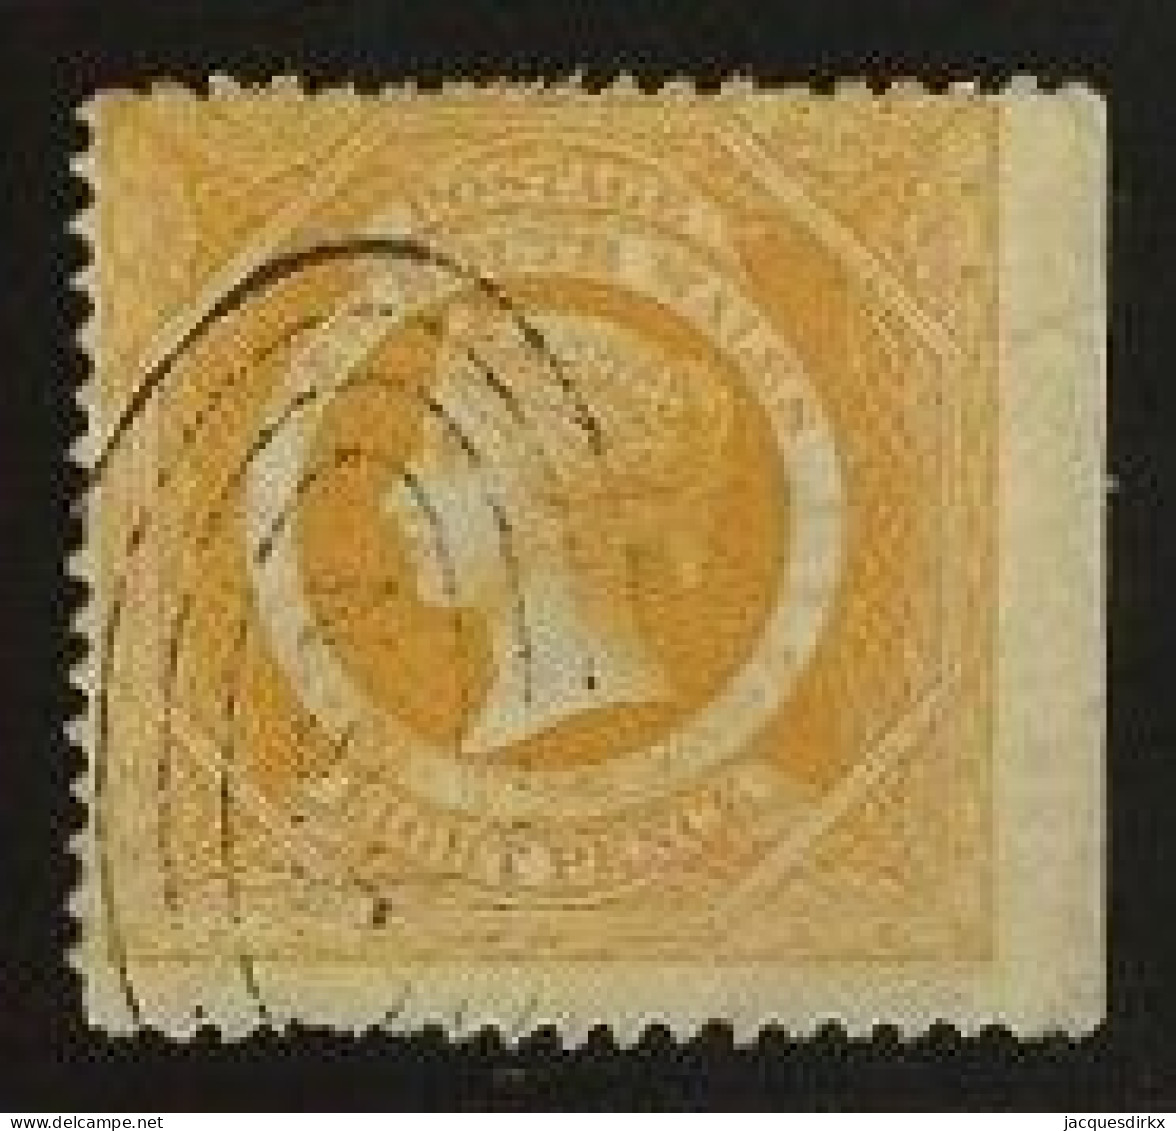 New South Wales      .   SG    .    218     .   O      .     Cancelled - Gebraucht